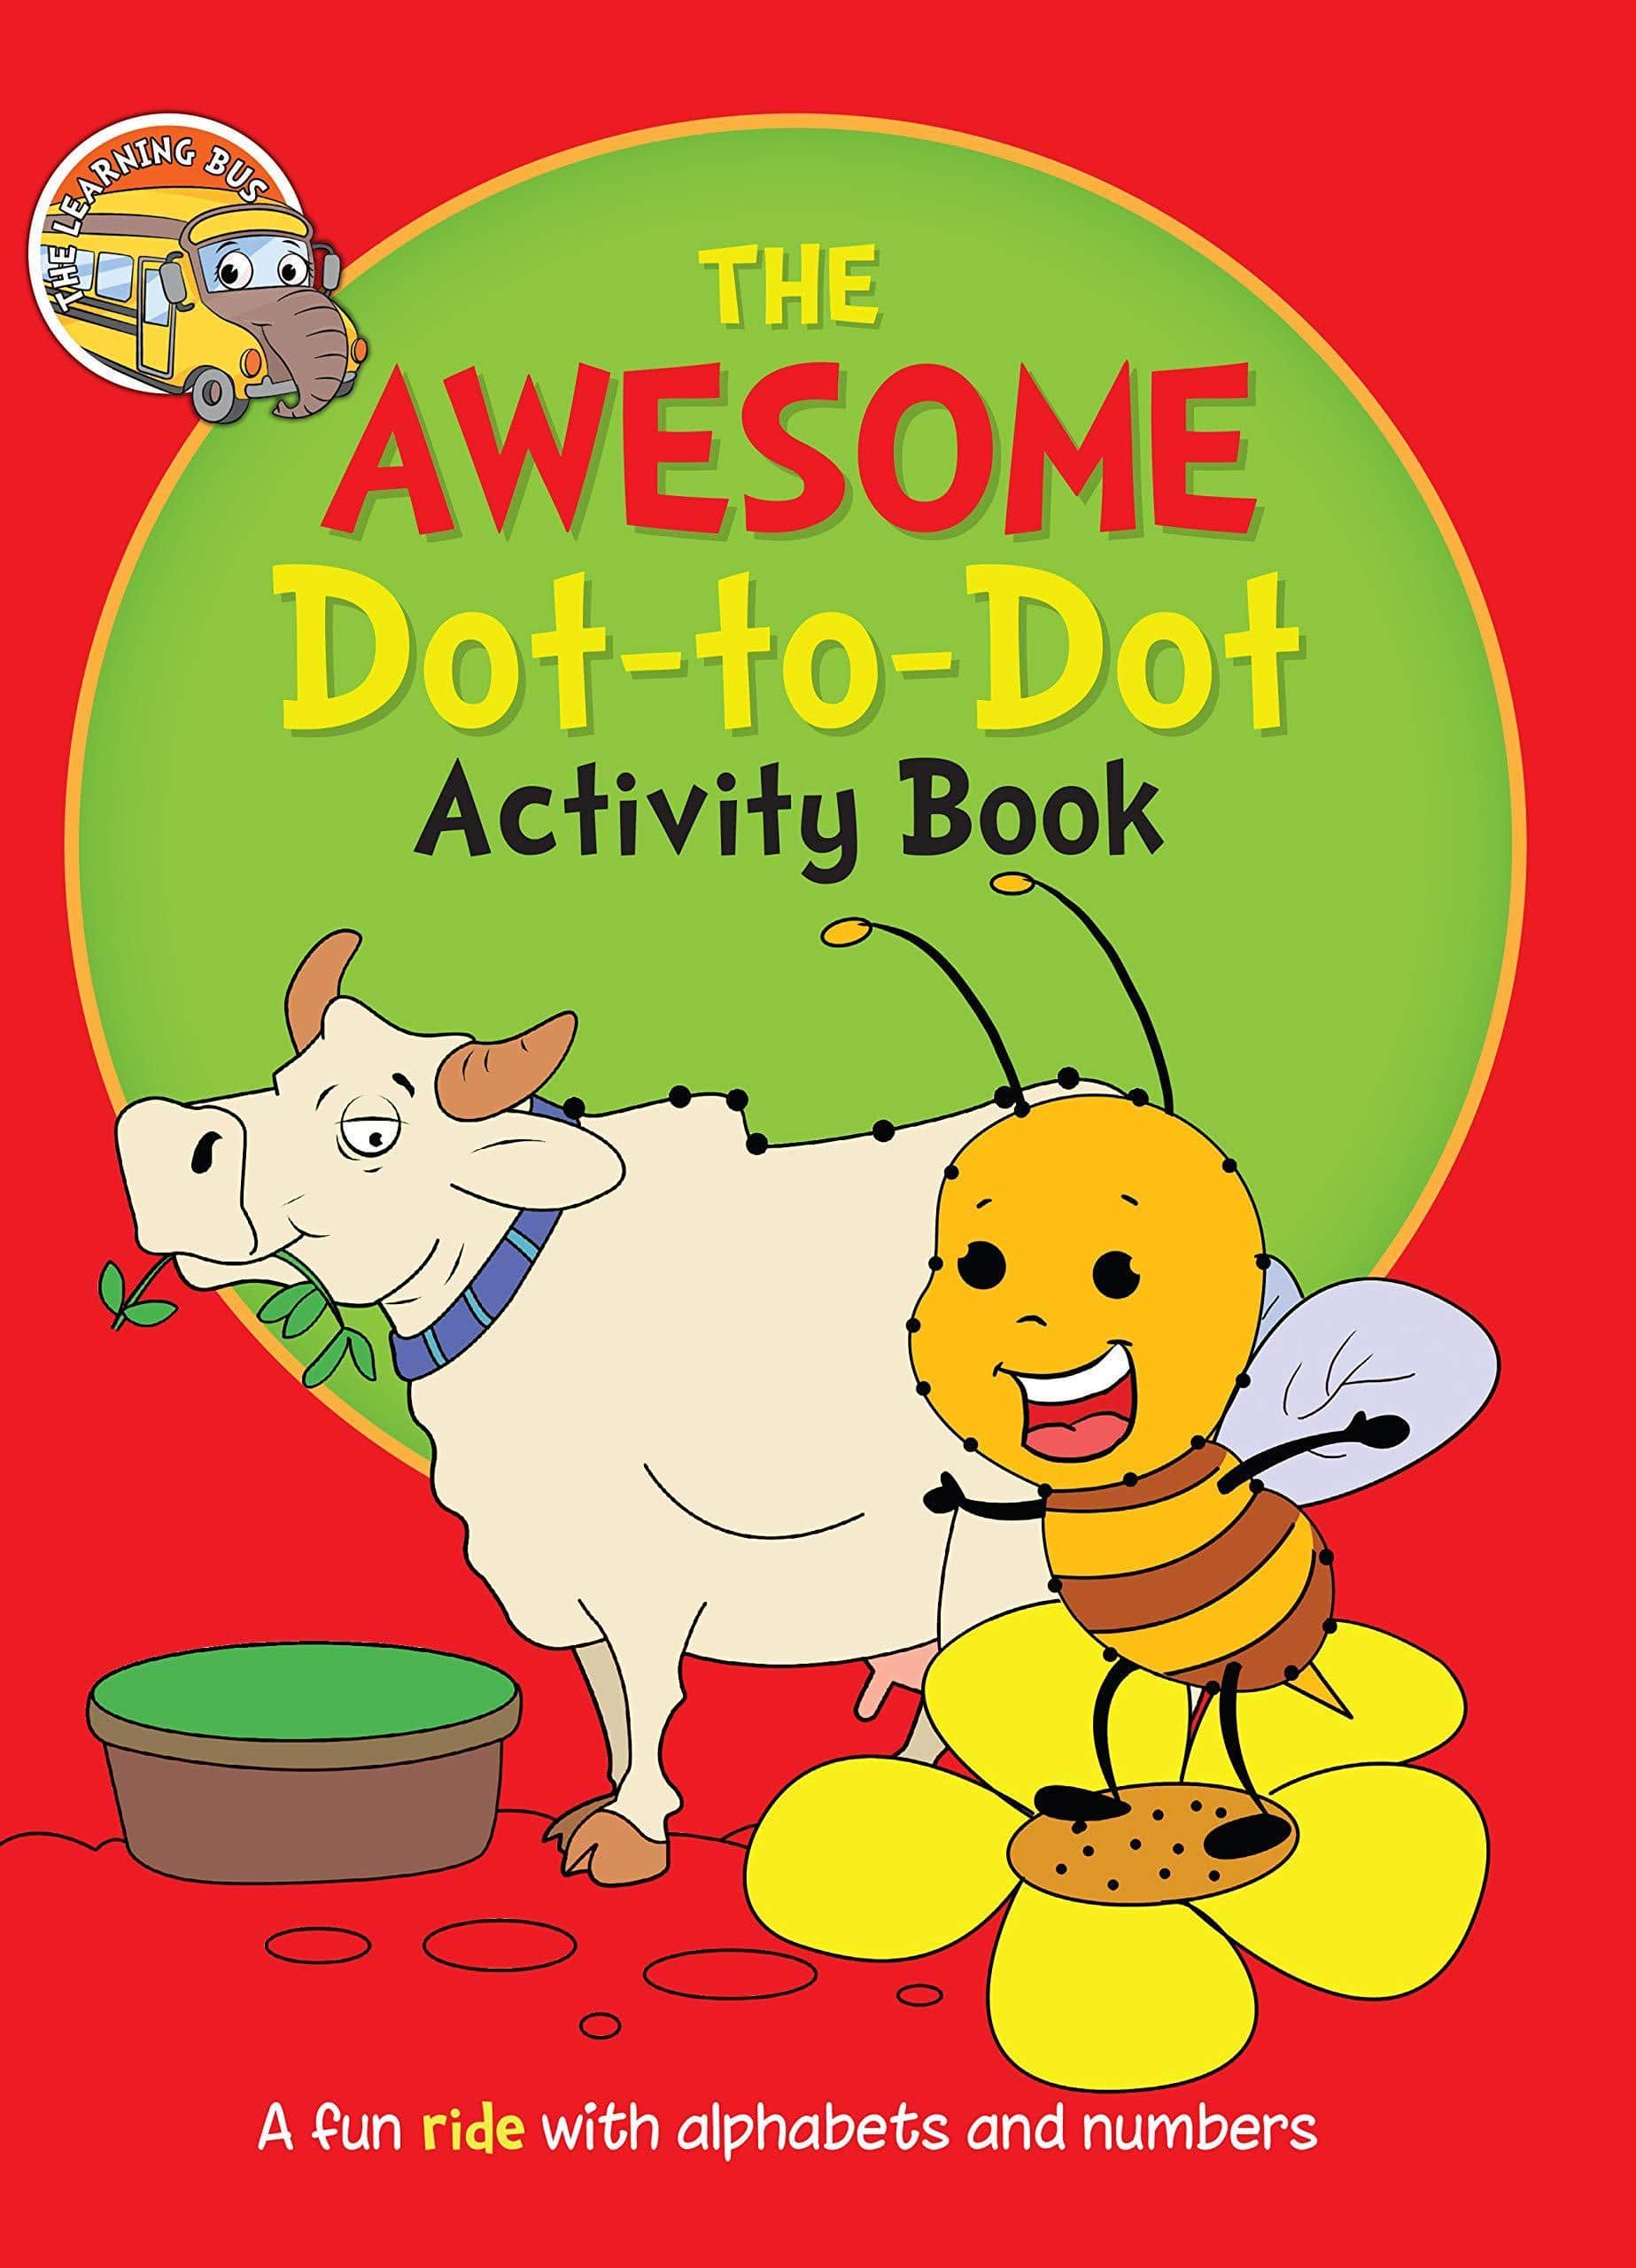 THE AWESOME DOT TO DOT ACTIVITY BOOK